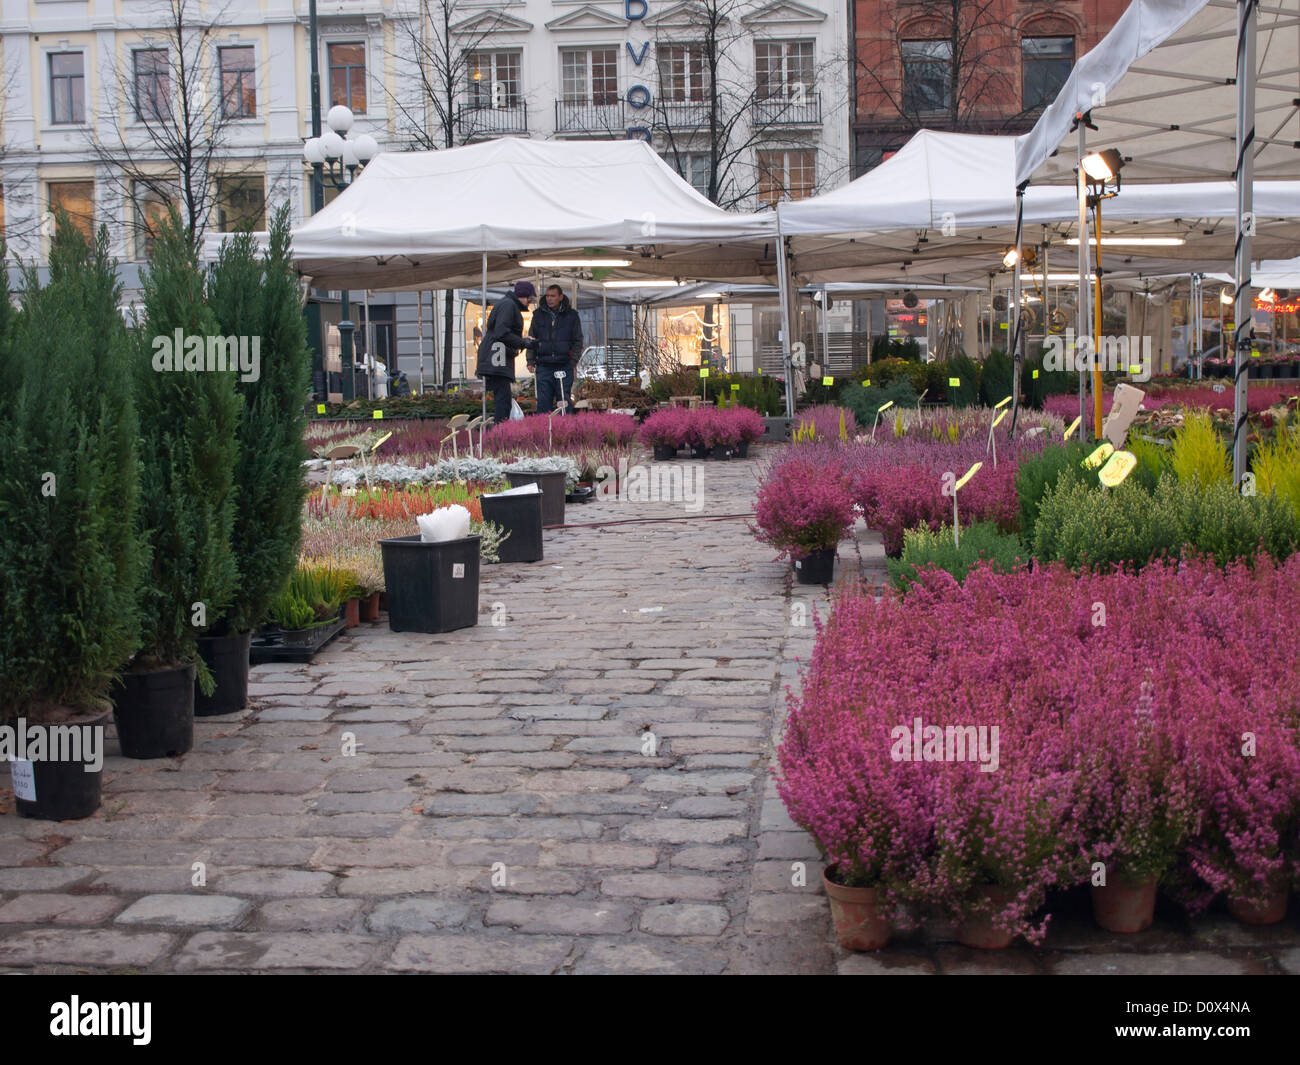 Outdoors market in Stortorget square in Oslo Norway, autumn flowers on offer Stock Photo